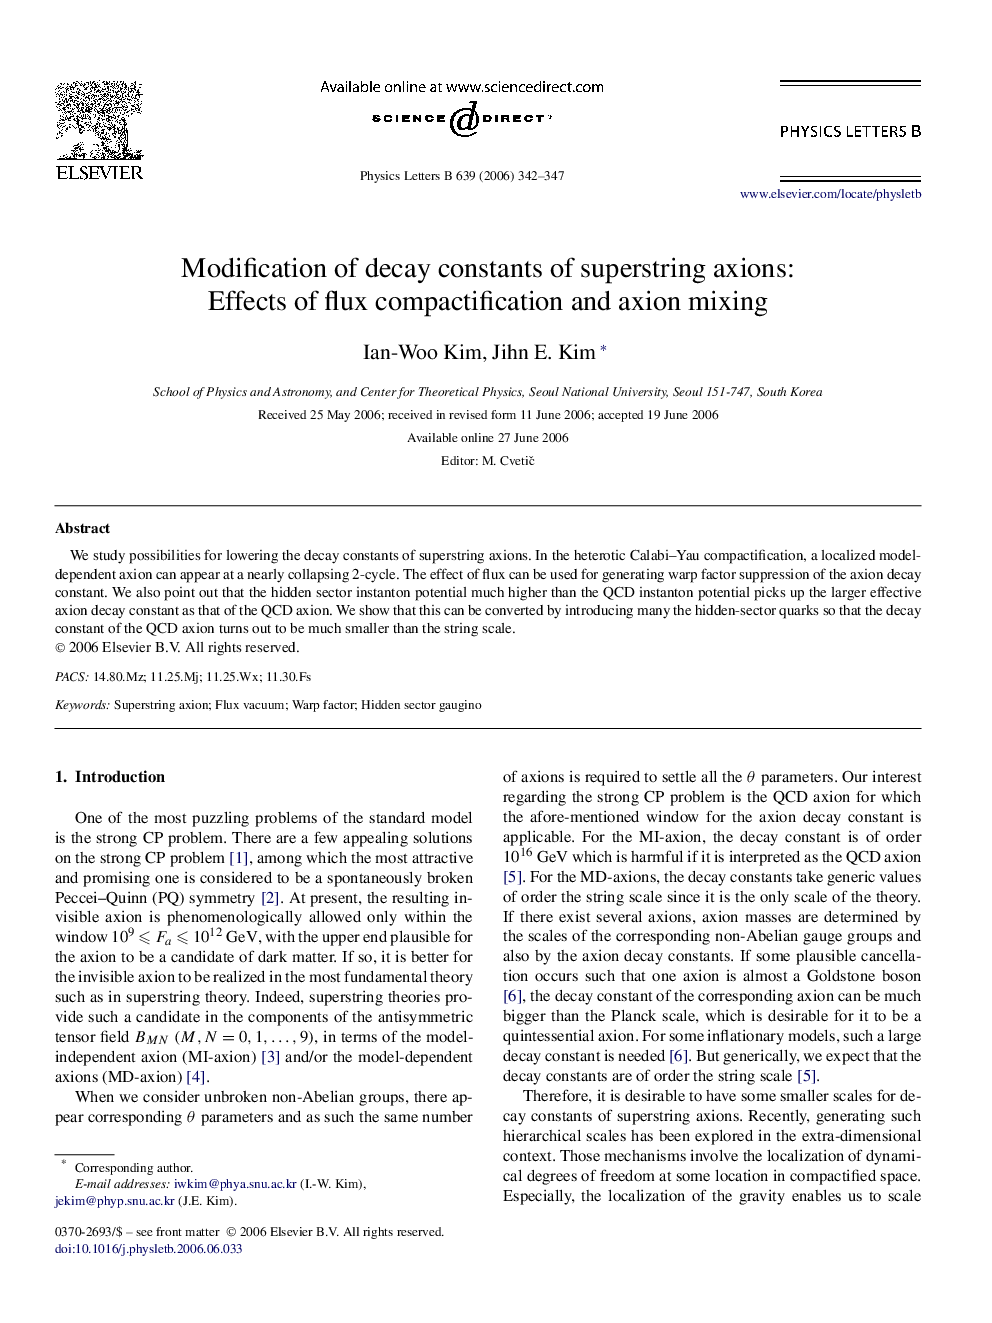 Modification of decay constants of superstring axions: Effects of flux compactification and axion mixing